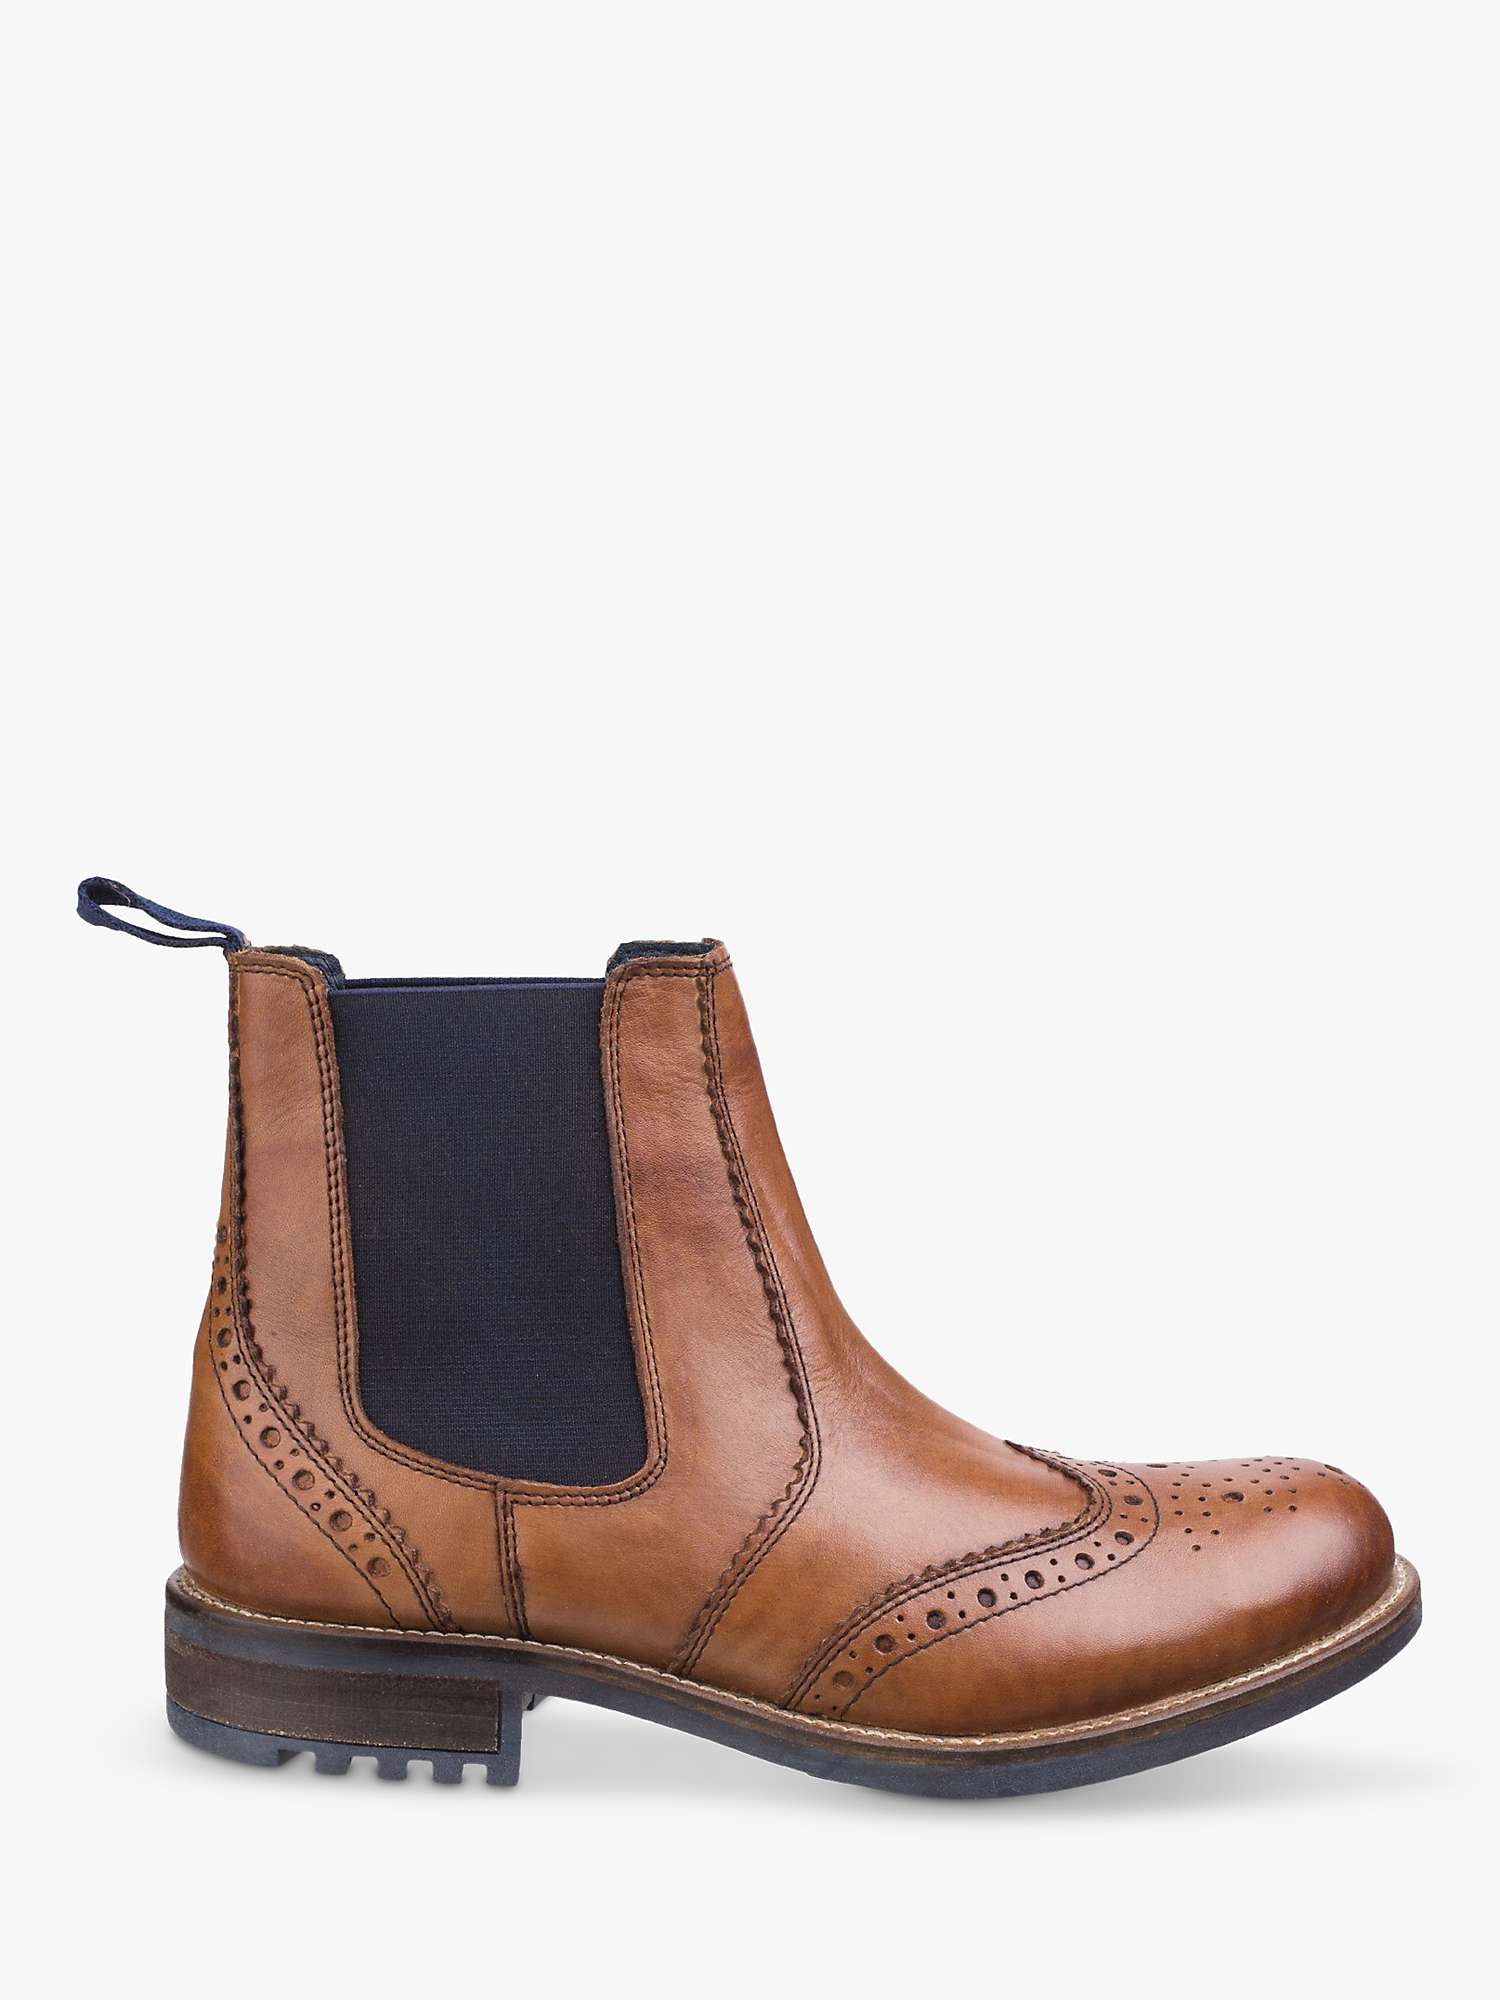 Buy Cotswold Cirencester Chelsea Leather Boots Online at johnlewis.com